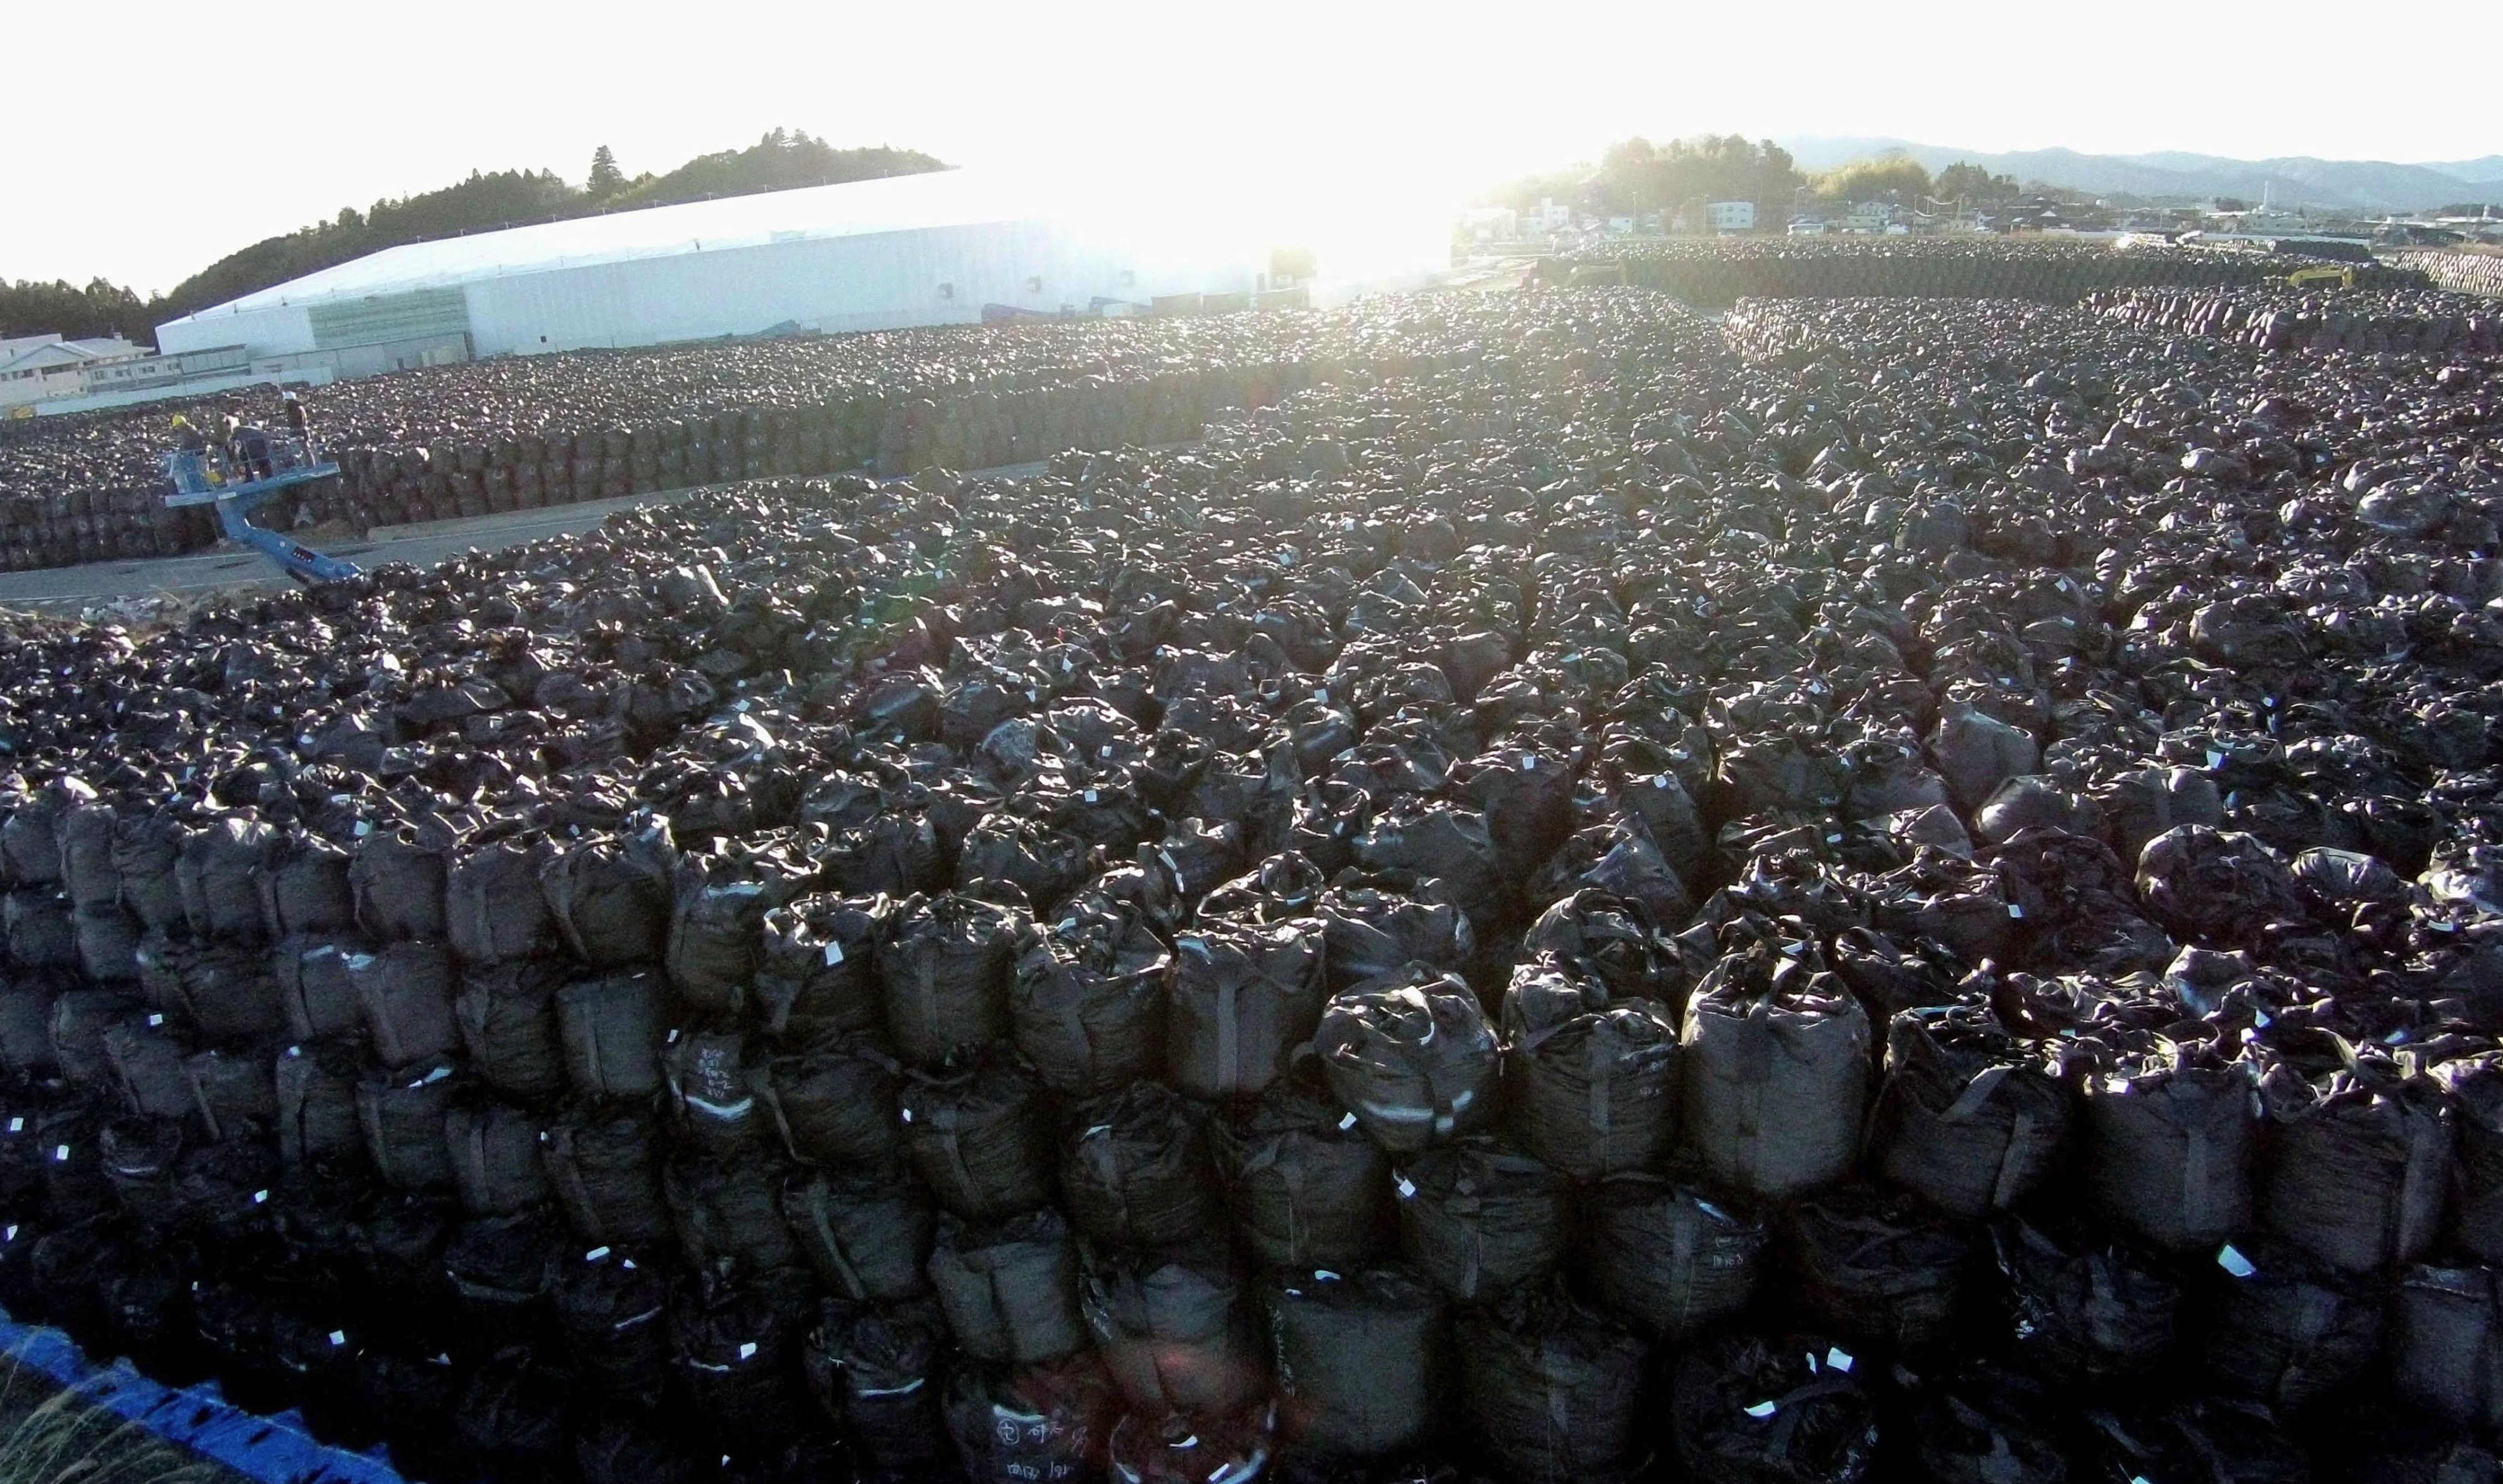 Bags of radioactive waste are seen piled up at a temporary storage site in Tomioka, Fukushima Prefecture, on Wednesday. Four years after the nuclear disaster began, a final disposal site for tainted debris it created has yet to be designated. | KYODO